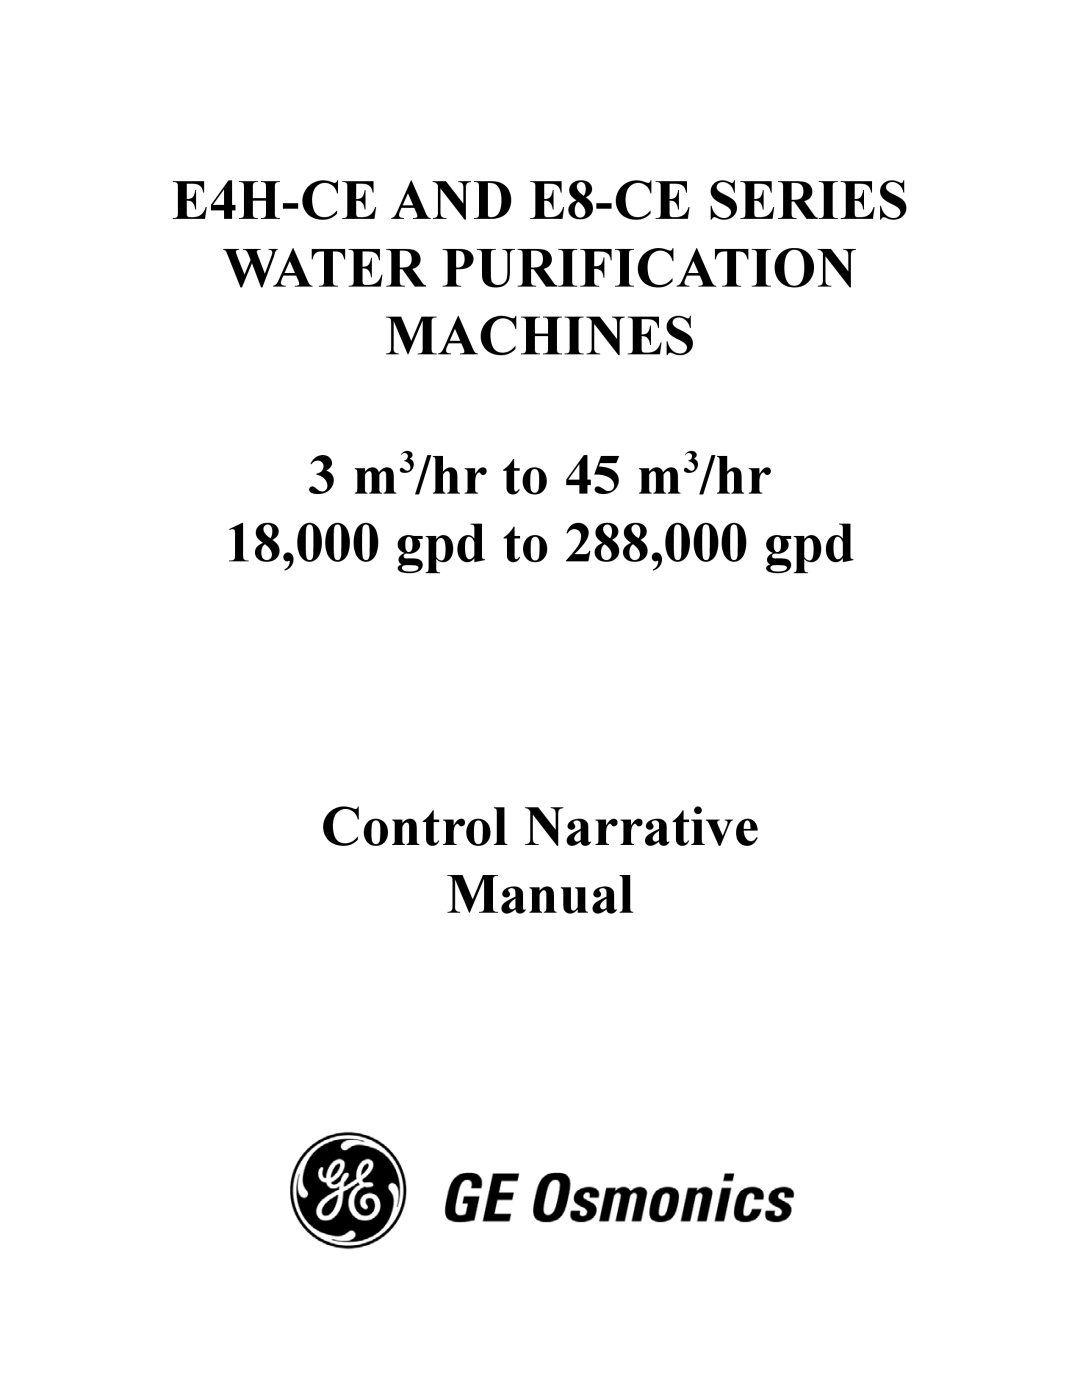 GE manual E4H-CE AND E8-CE SERIES WATER PURIFICATION MACHINES, Manual 